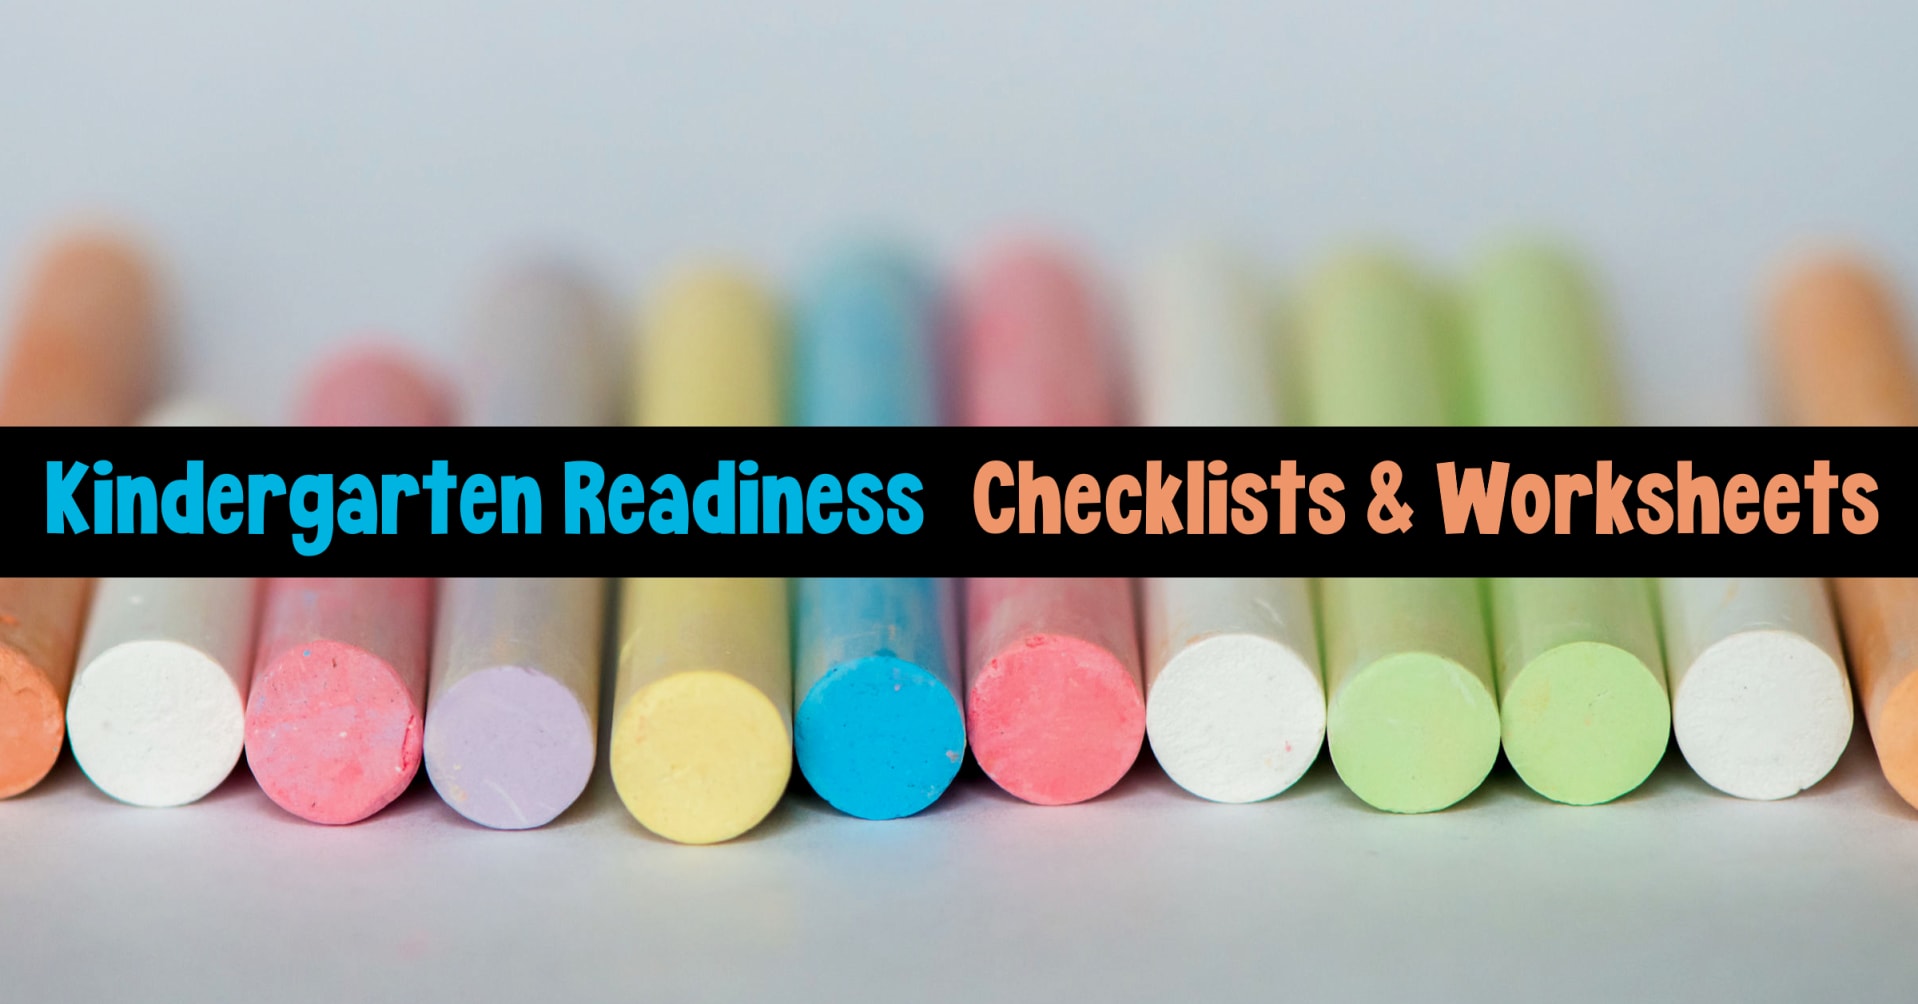 Is MY child ready for kindergarten? These kindergarten readiness skills checklists for parents are almost better than a kindergarten readiness class - take the Is My Child Ready for Kindergarten quiz before you enroll your chicle in a kindergarten readiness program. Some of these are skills learned IN kindergarten - you can evaluate with this printable kindergarten readiness checklist pdf